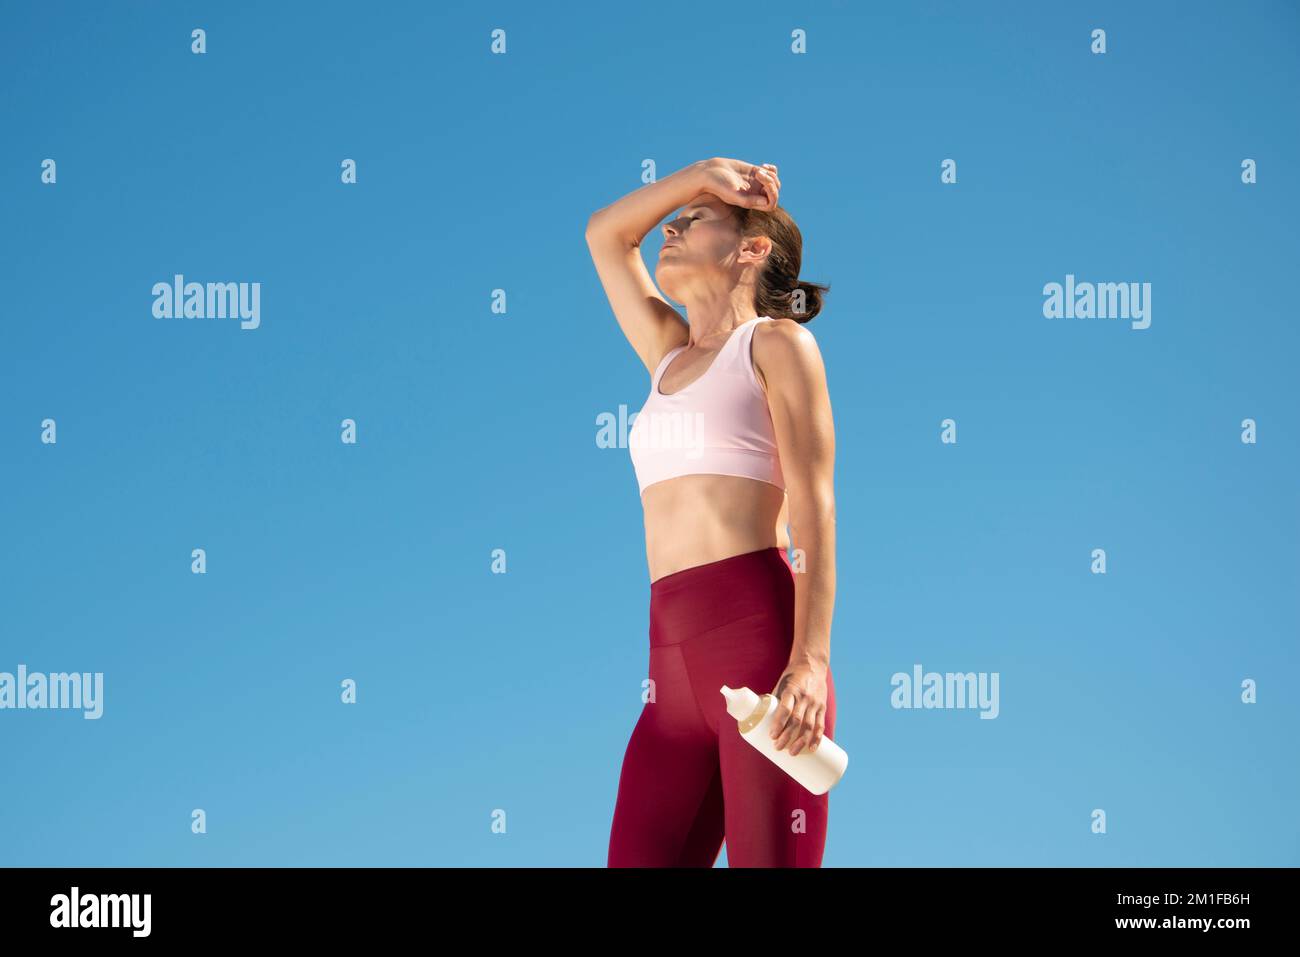 fit sporty woman standing in the sun holding a glass bottle of water, heatwave concept. Stock Photo